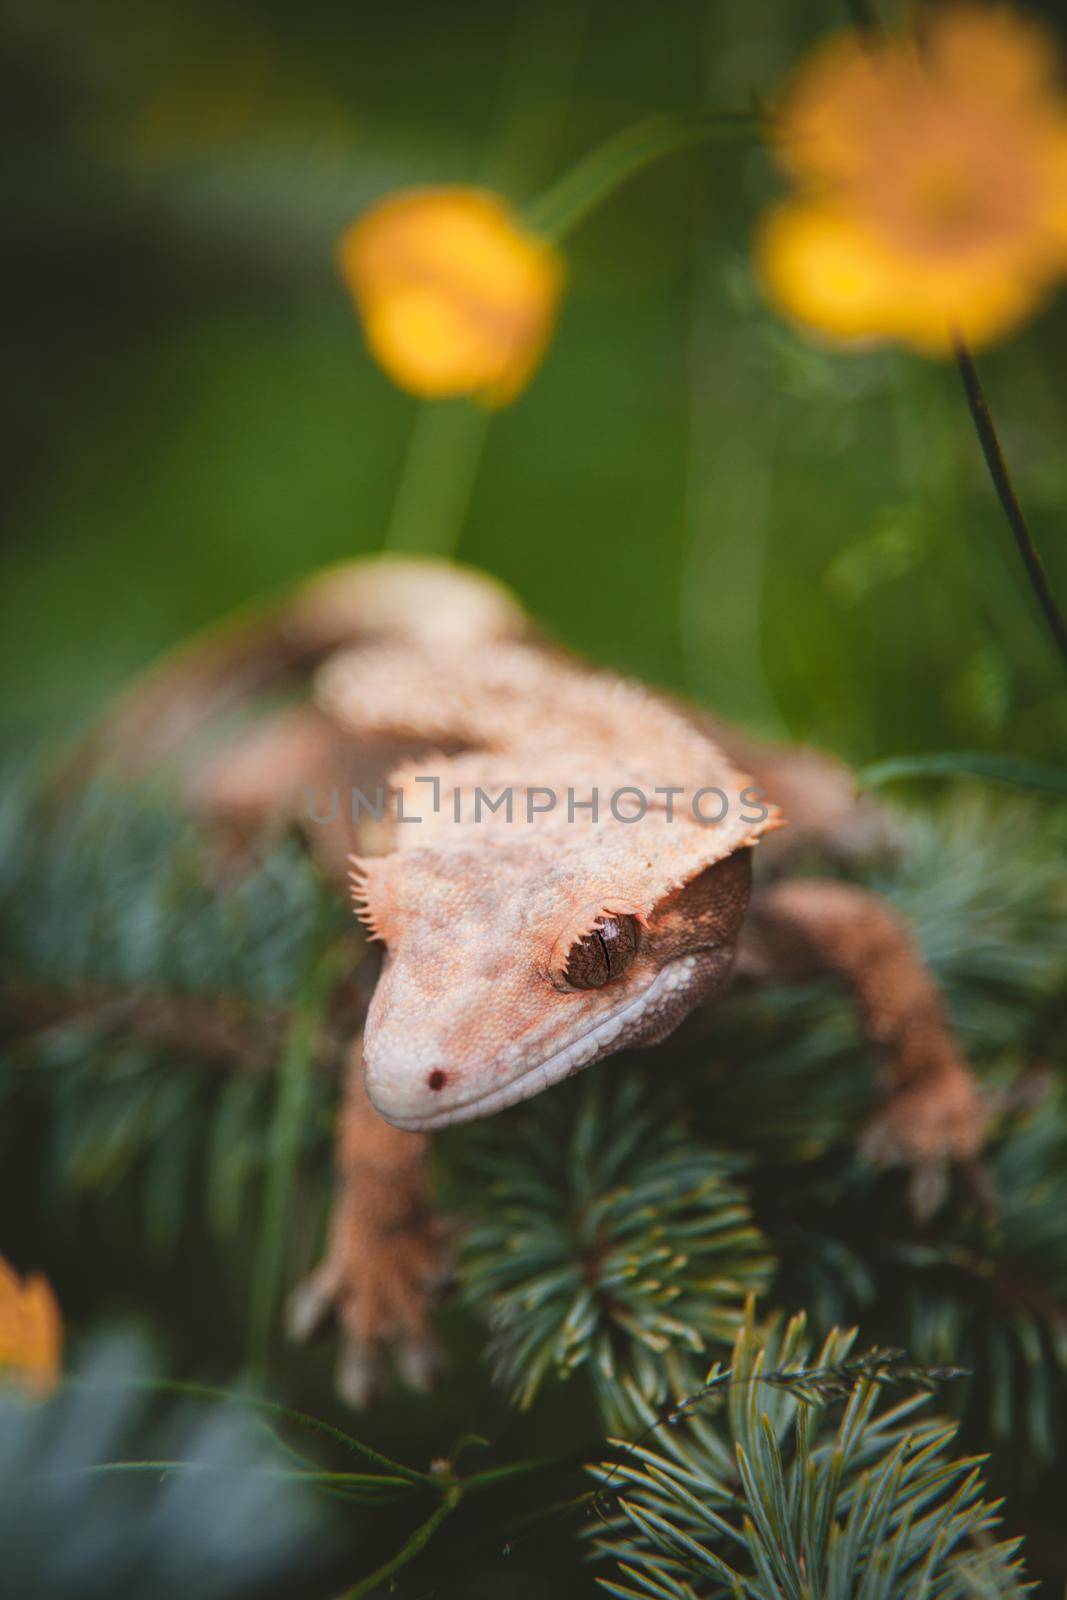 New Caledonian crested gecko, Rhacodactylus ciliatus,on tree with flowers